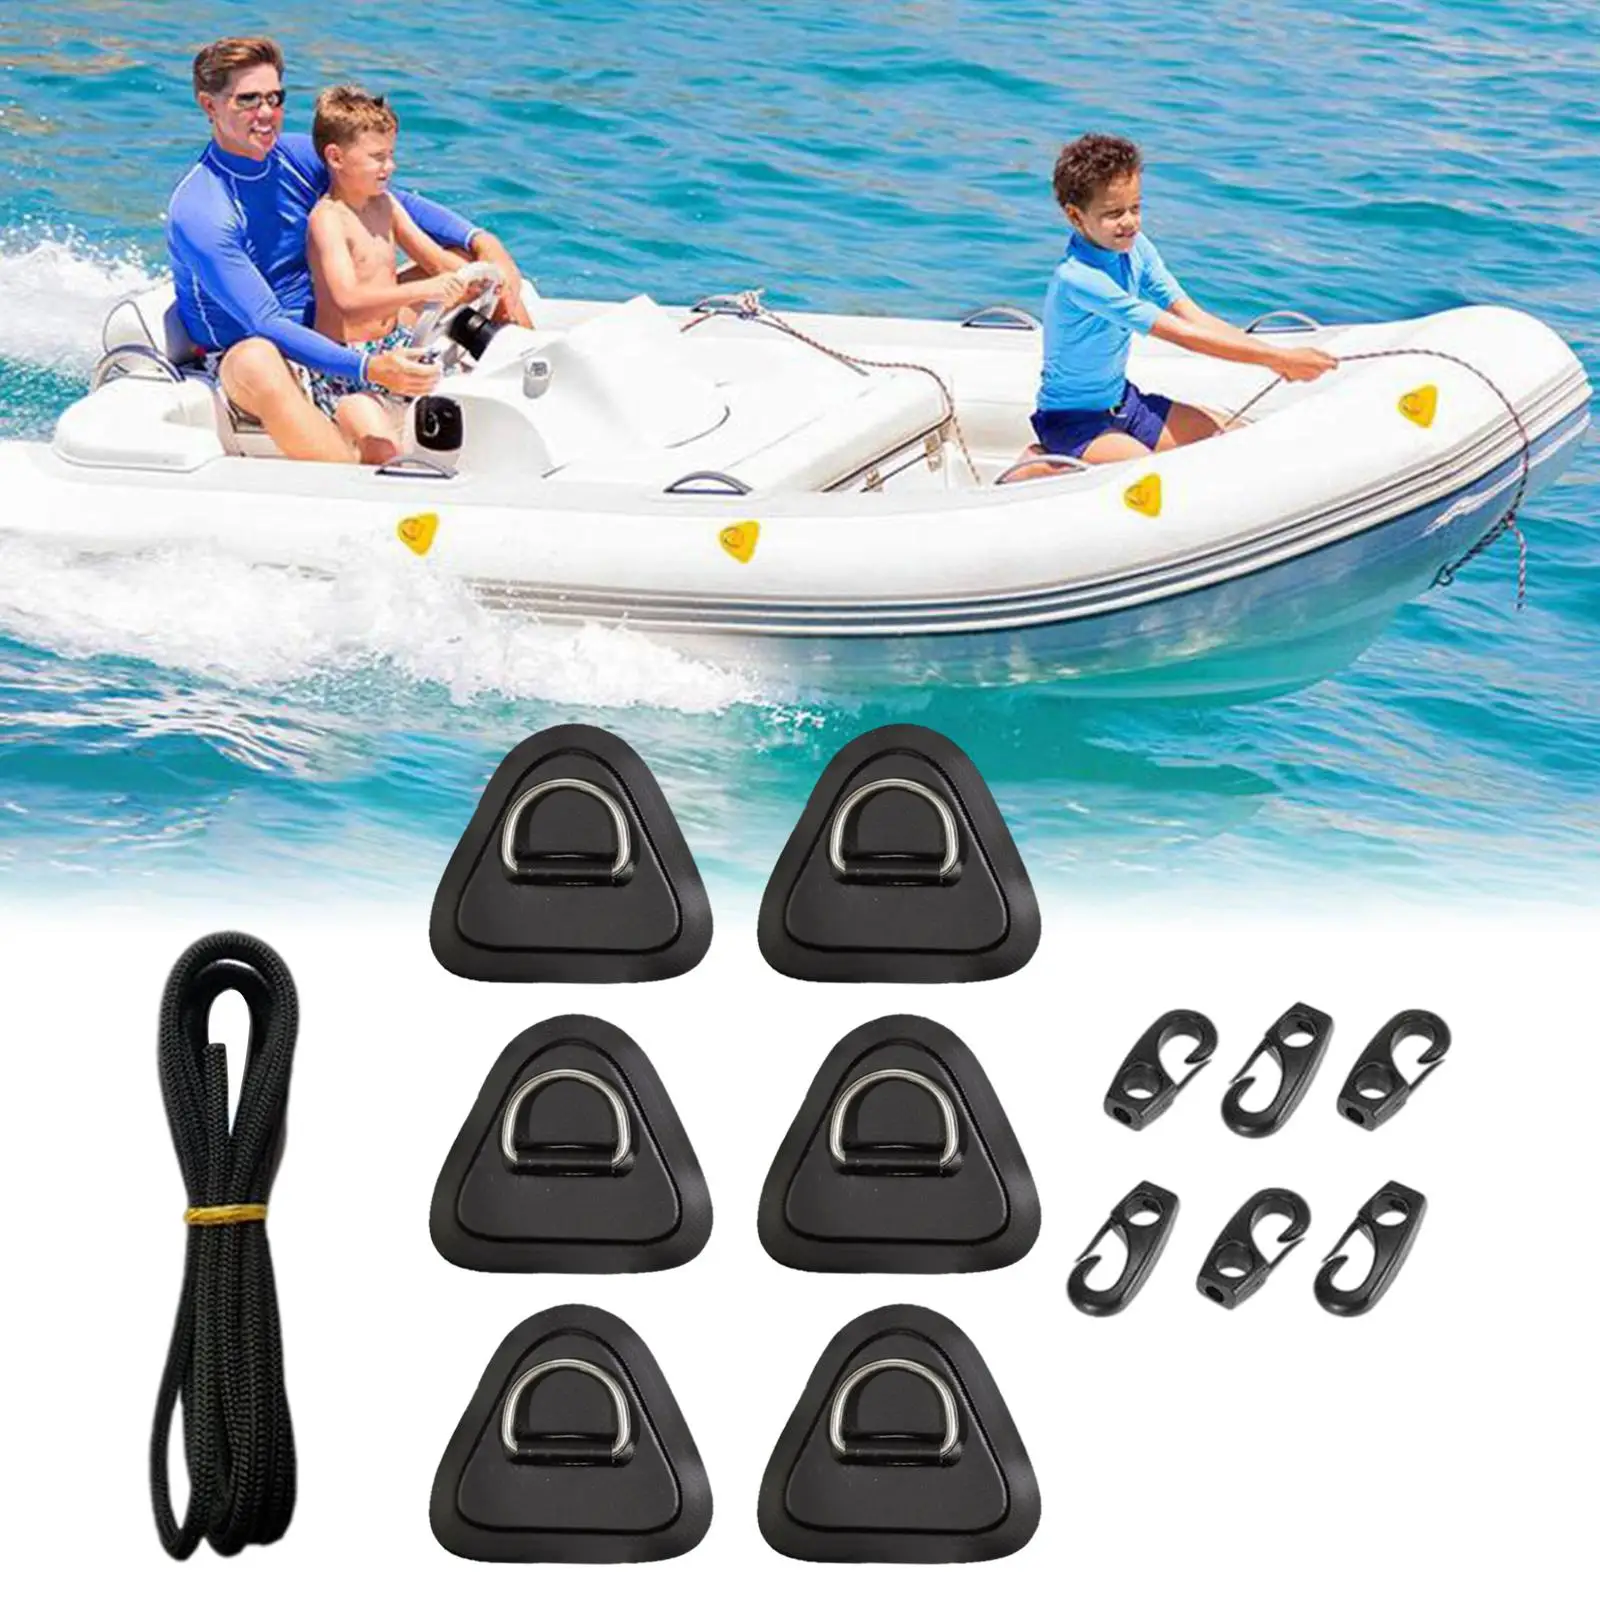 6x PVC , Deck Rigging D  Pad, for Surfboard Thigh Straps Inflatable Boat